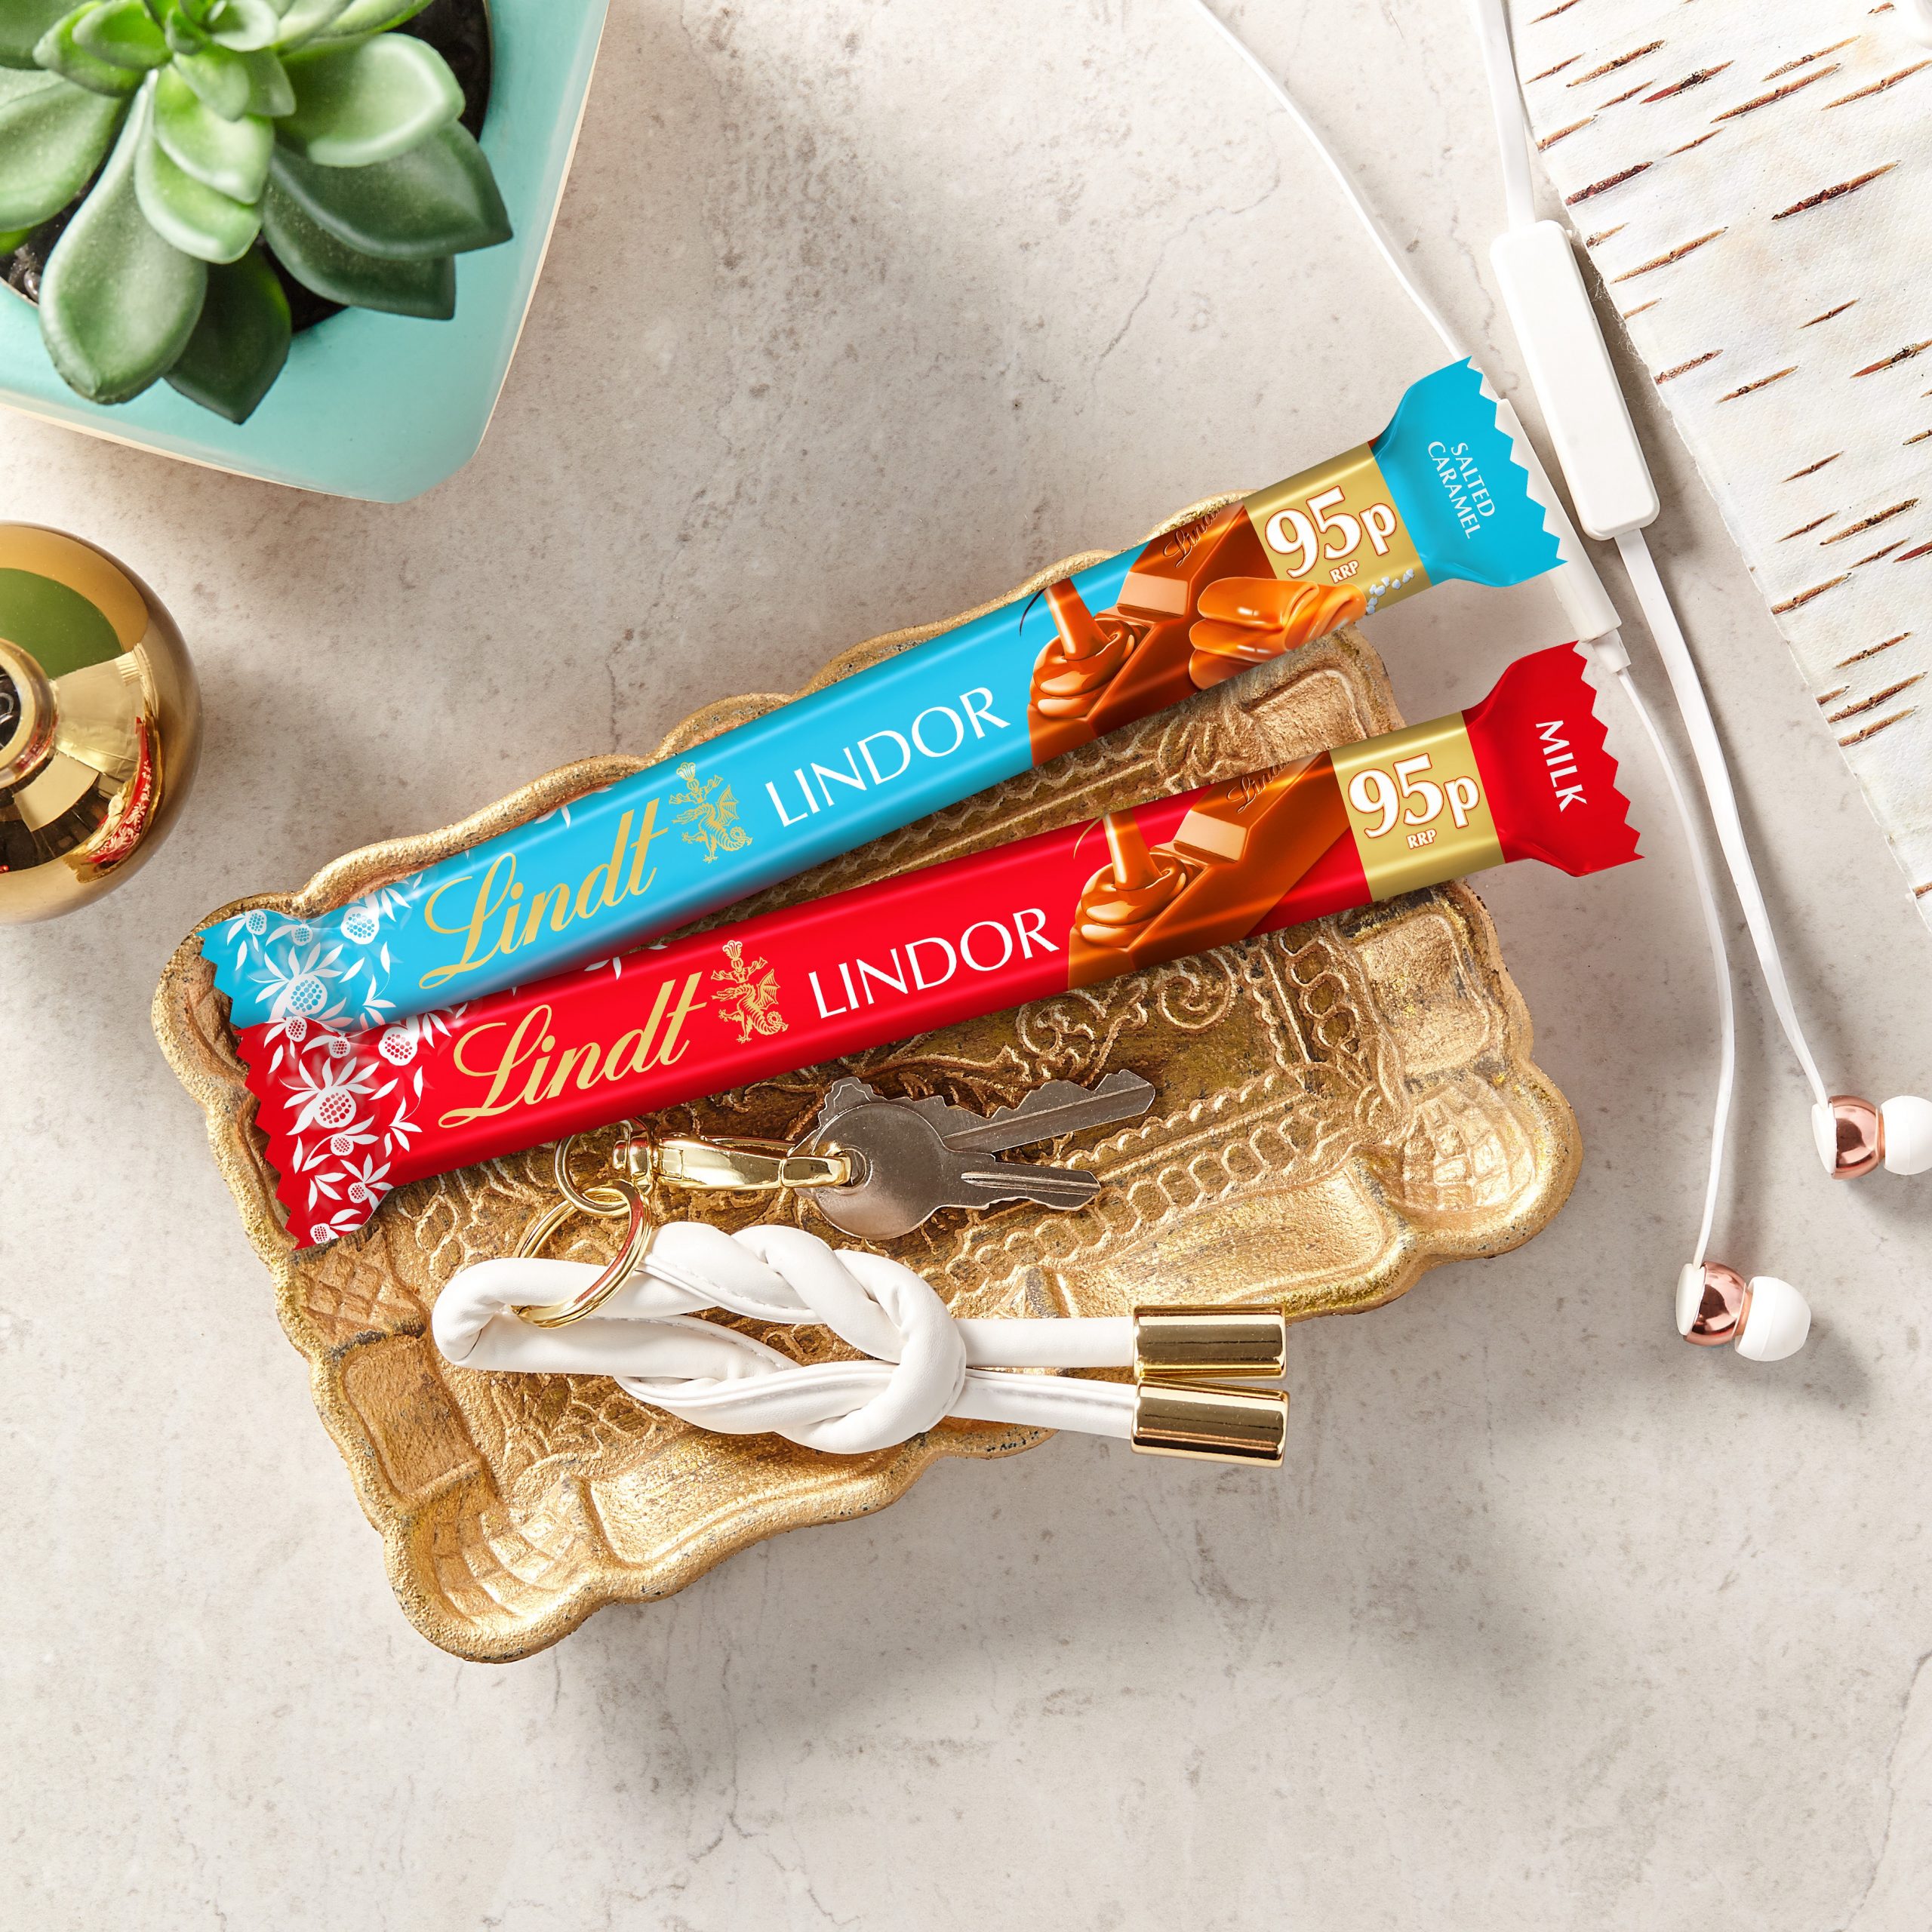 Lindt LINDOR launches Price-Marked Packs